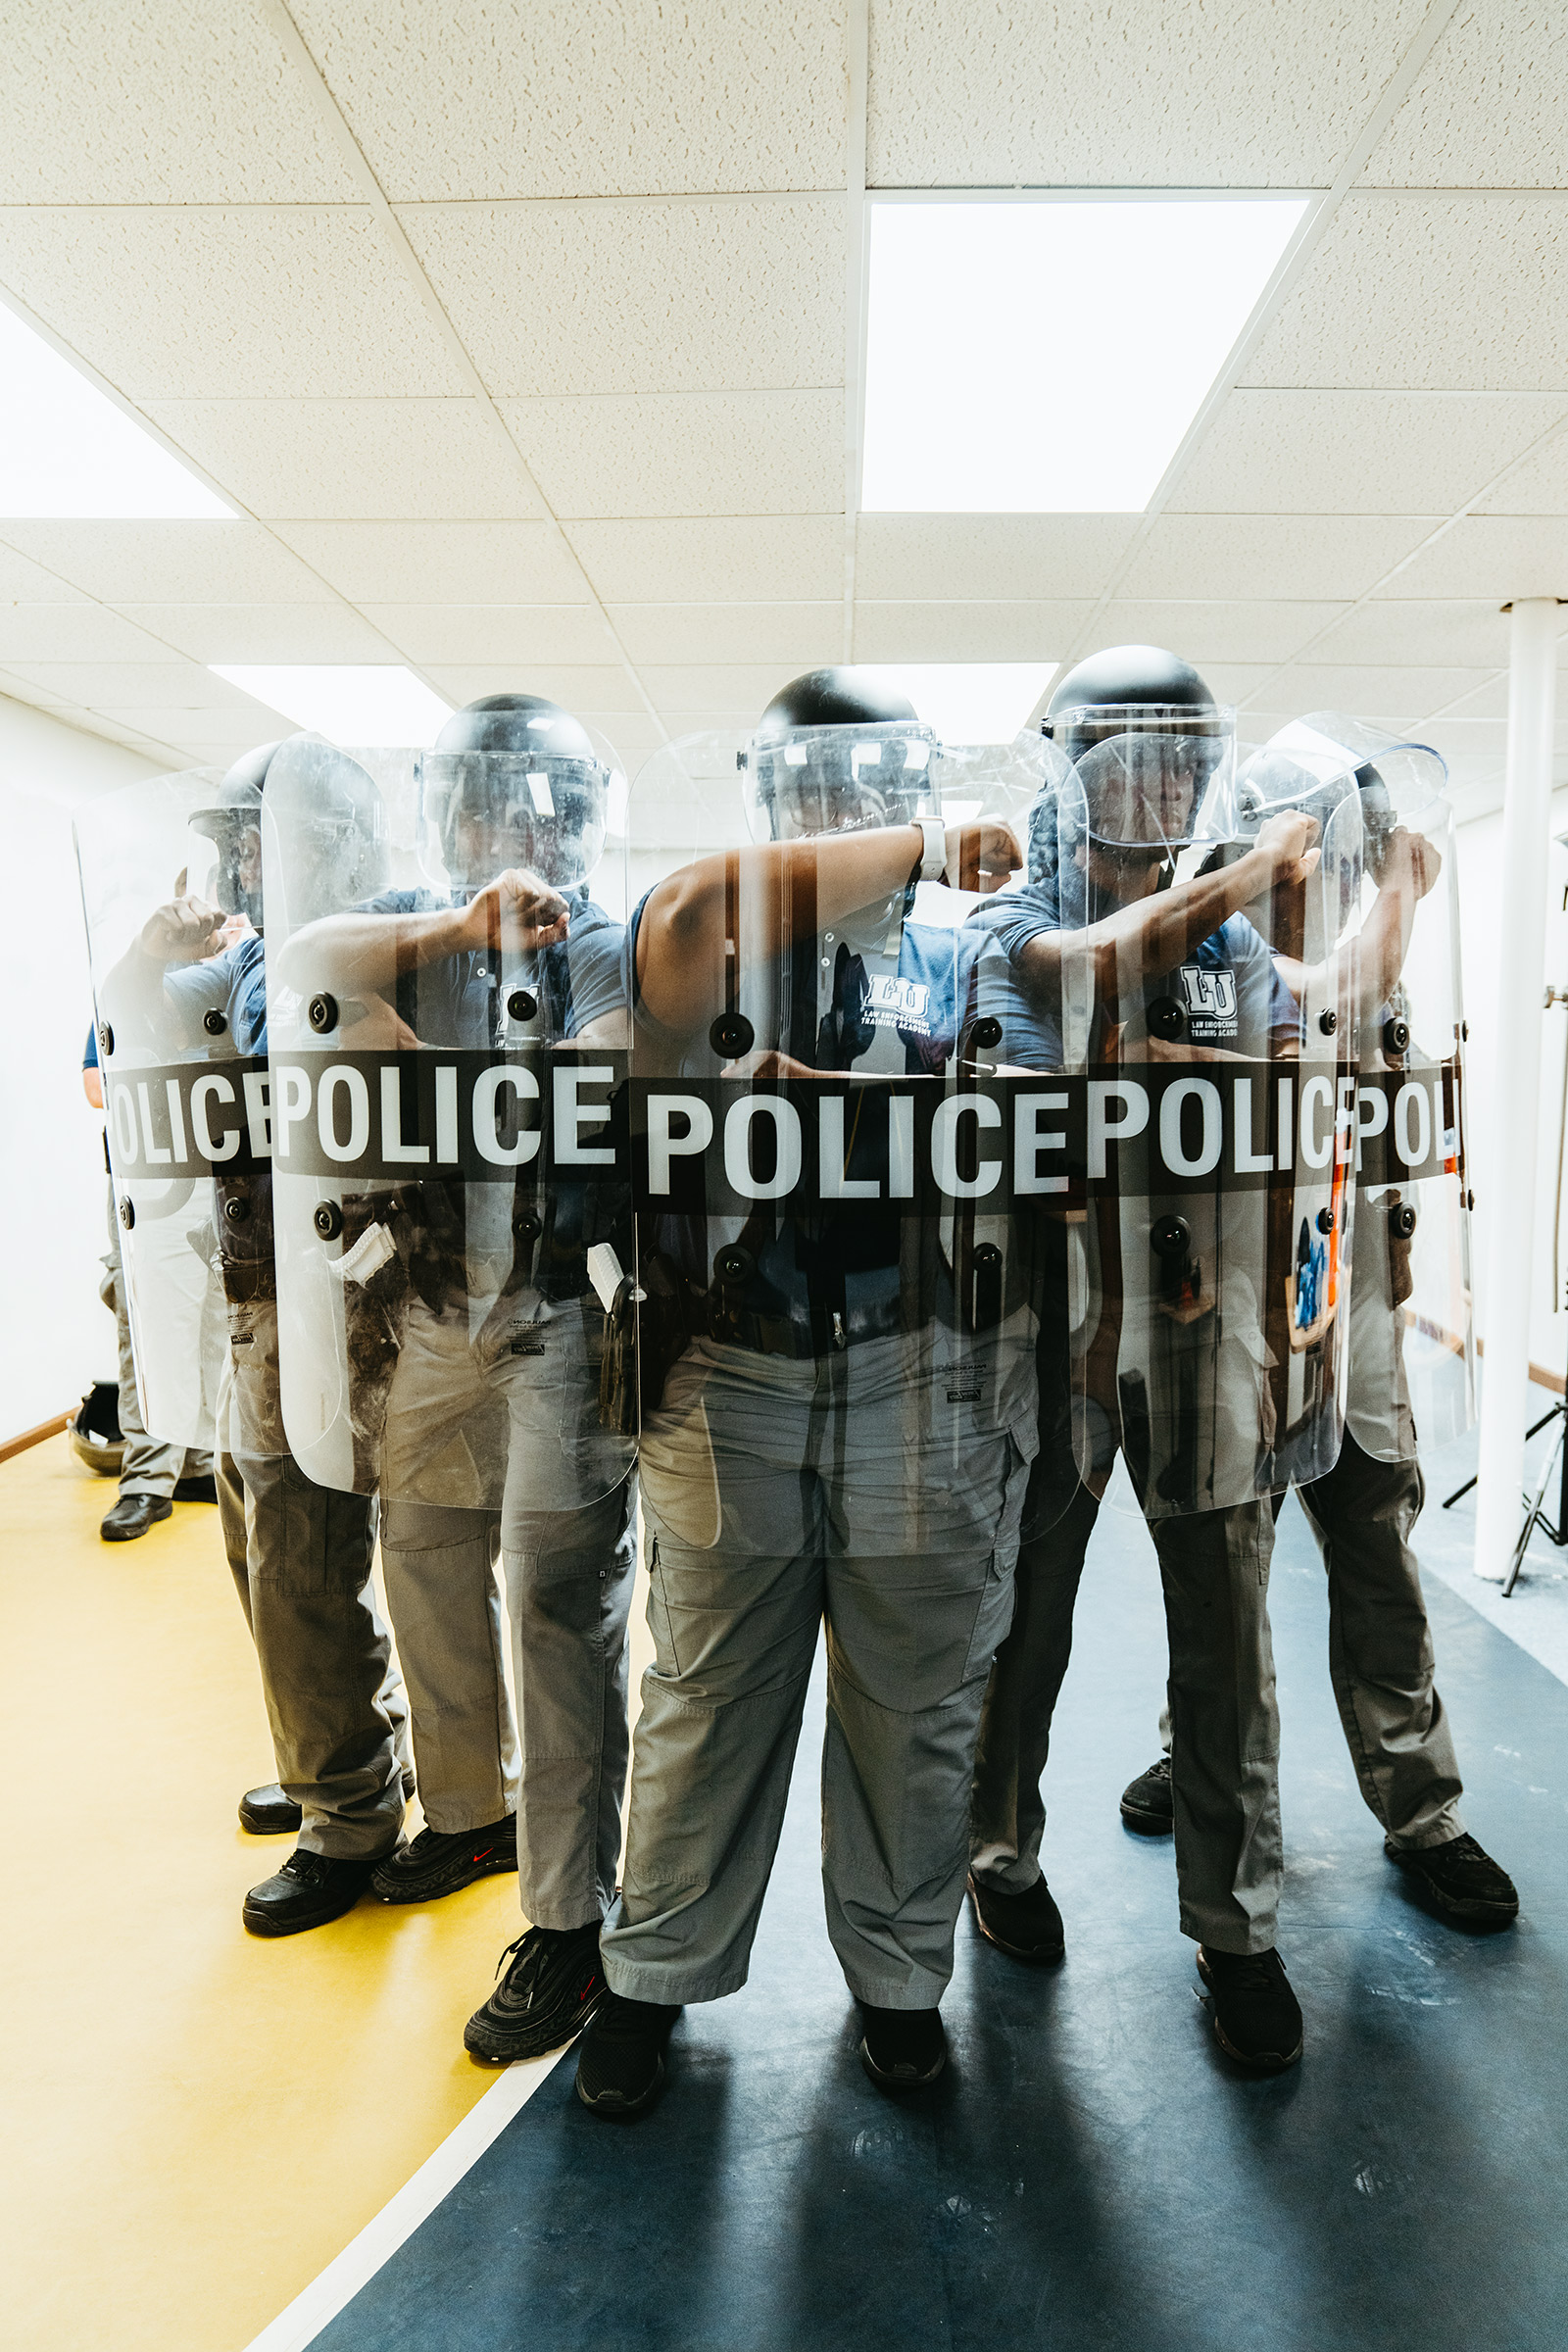 Students in tactical training at the Lincoln University Police Academy in Jefferson City, Mo., on March 12 (Joe Martinez for TIME)